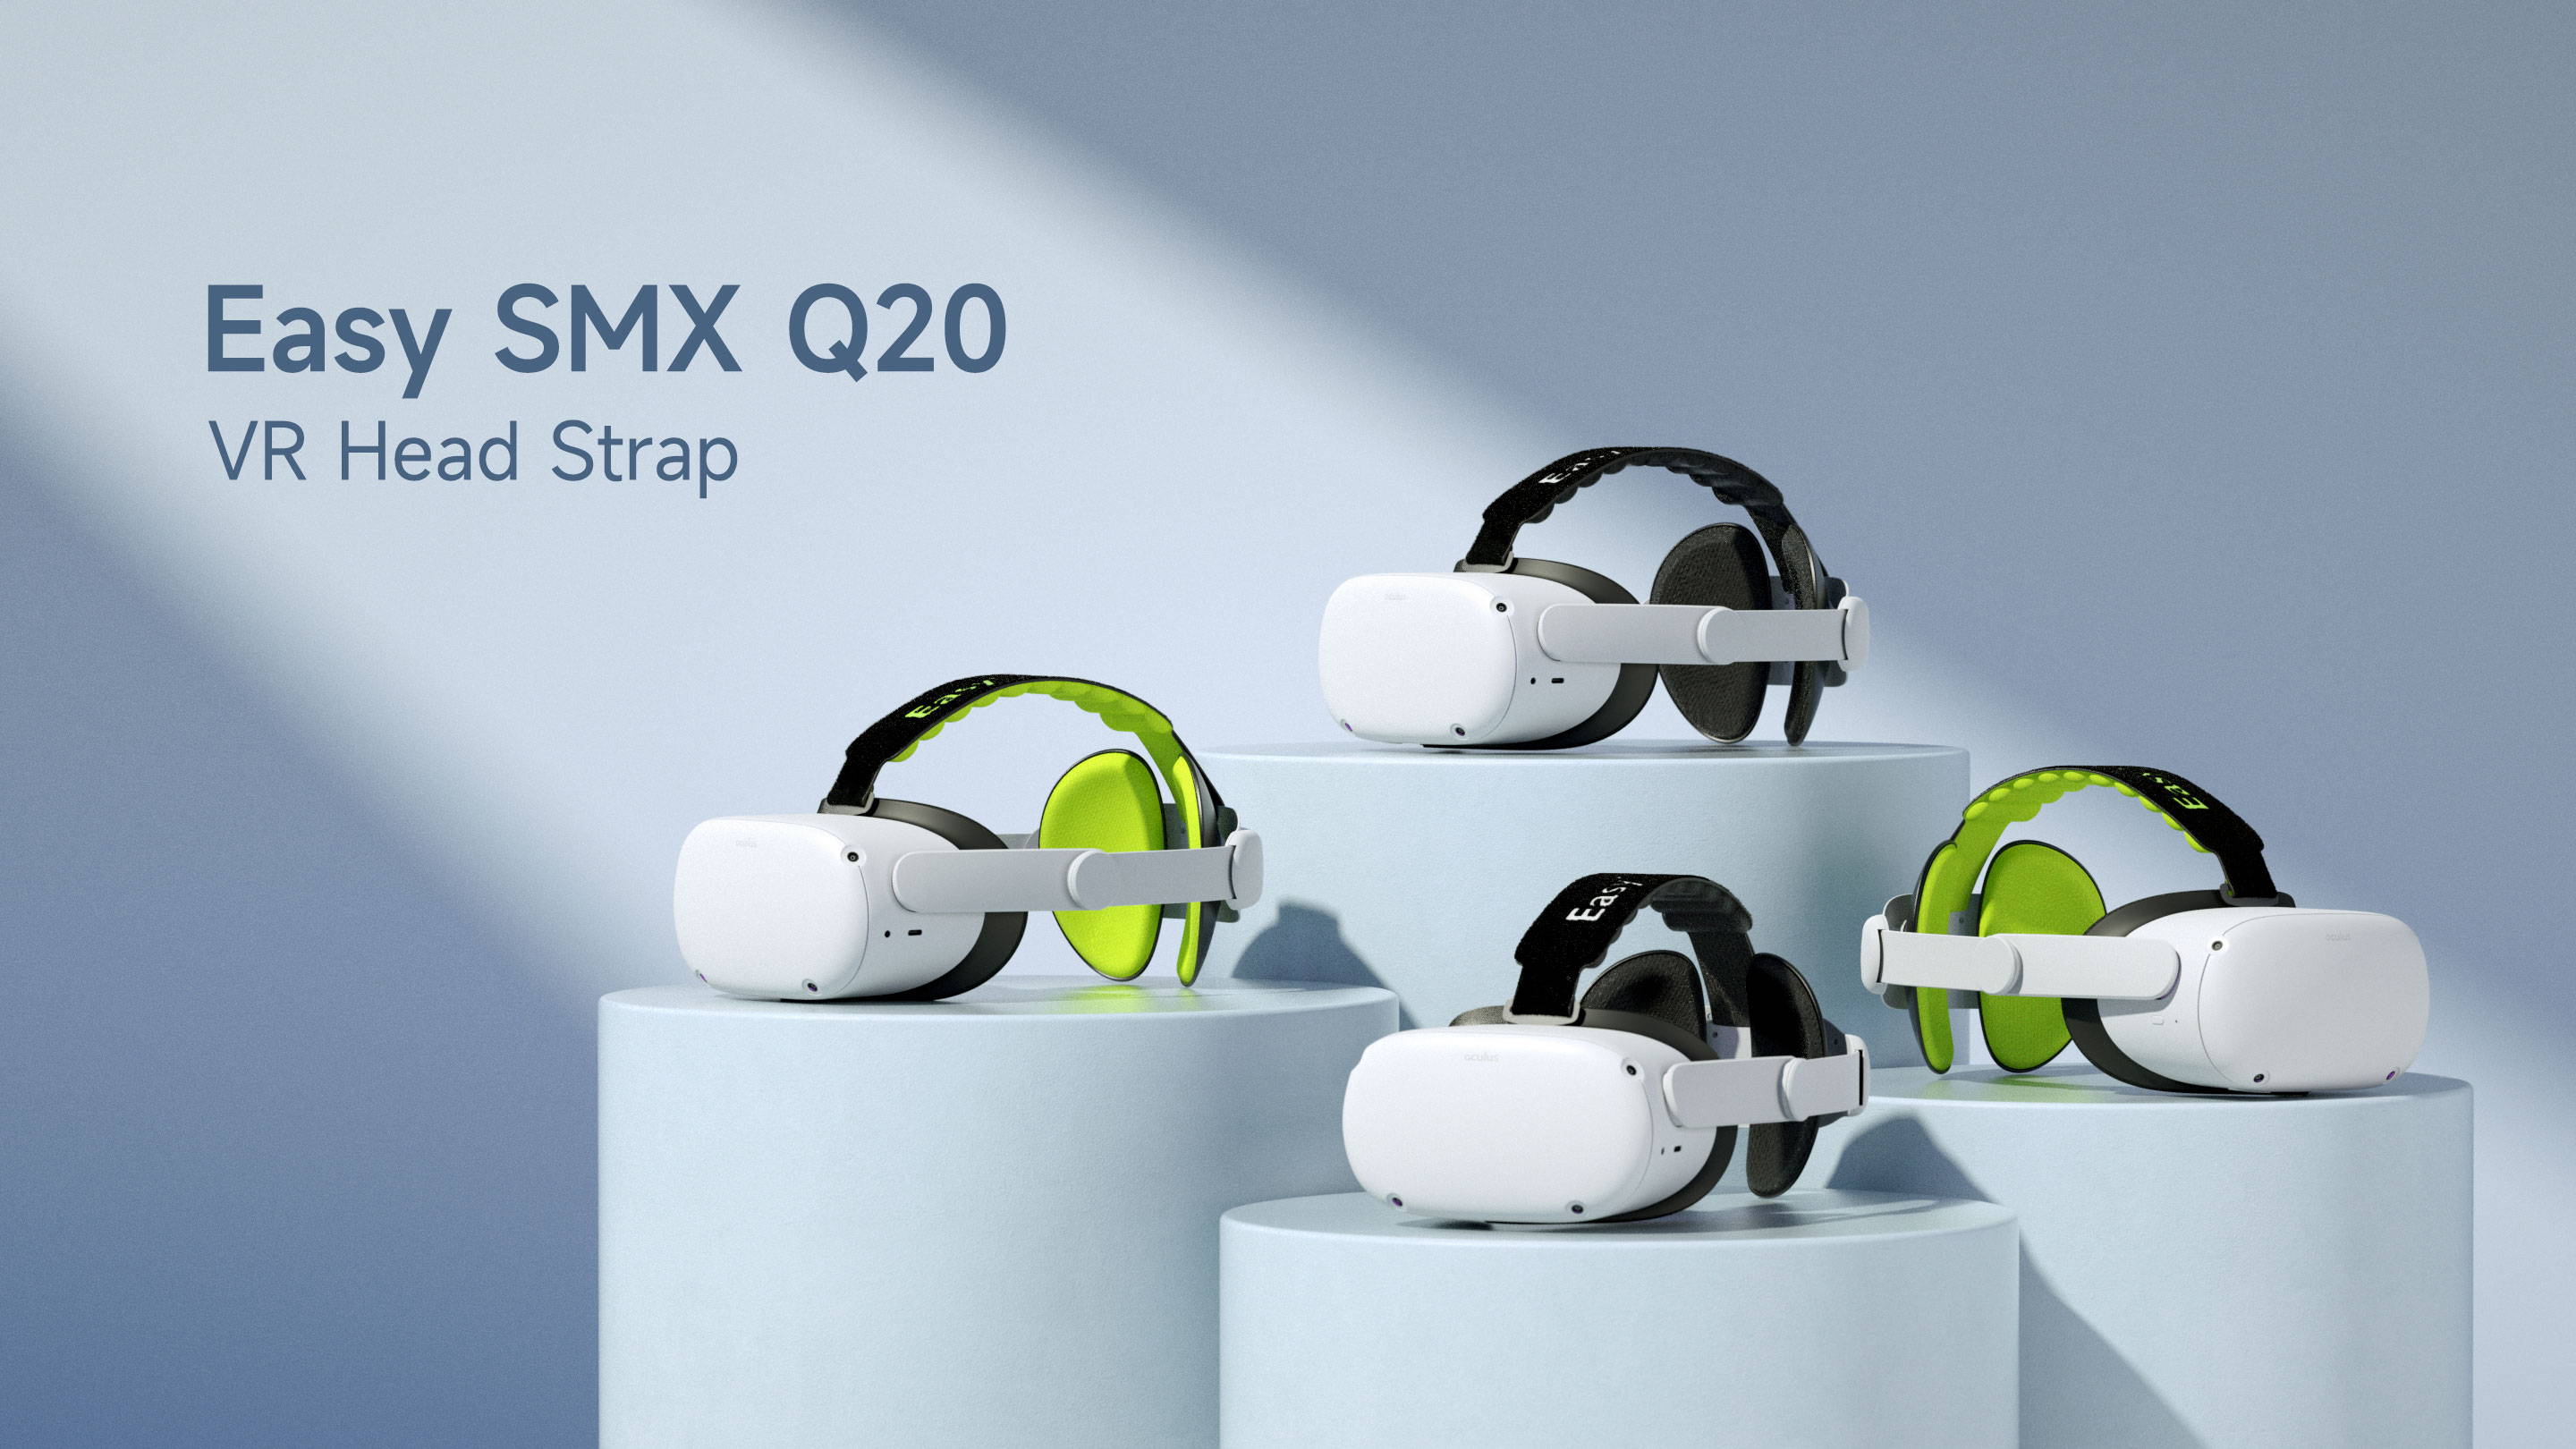 EasySMX Q20 VR Head Strap for Oculus Quest 2